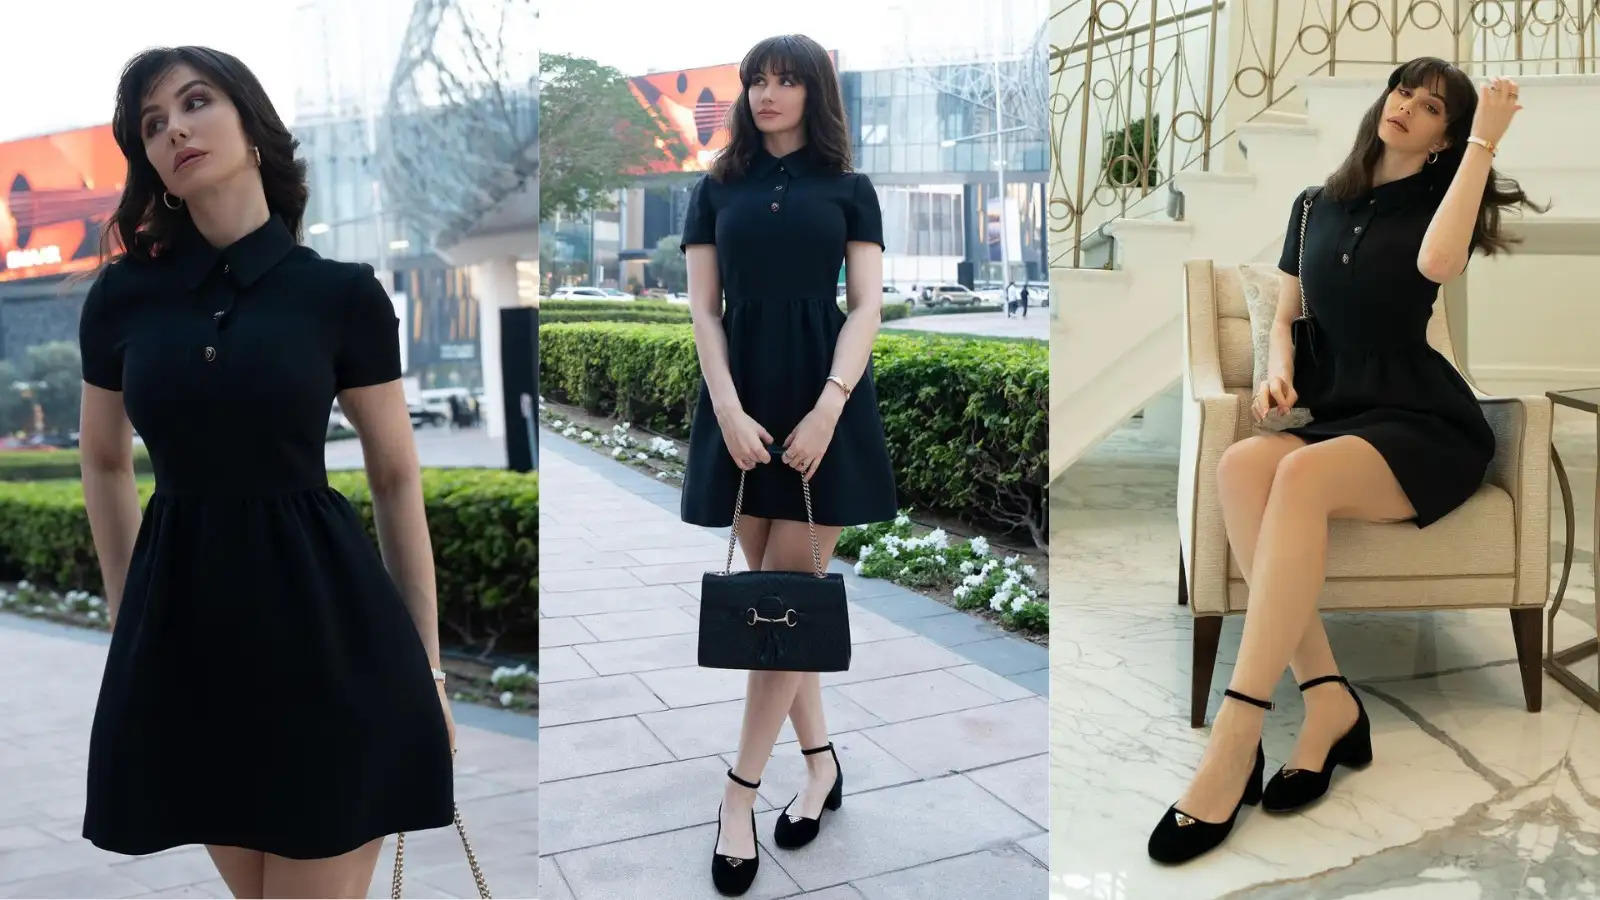 Giorgia Andriani stuns in a Black Outfit The Cost Of THIS Dress Will Blow Your Mind 